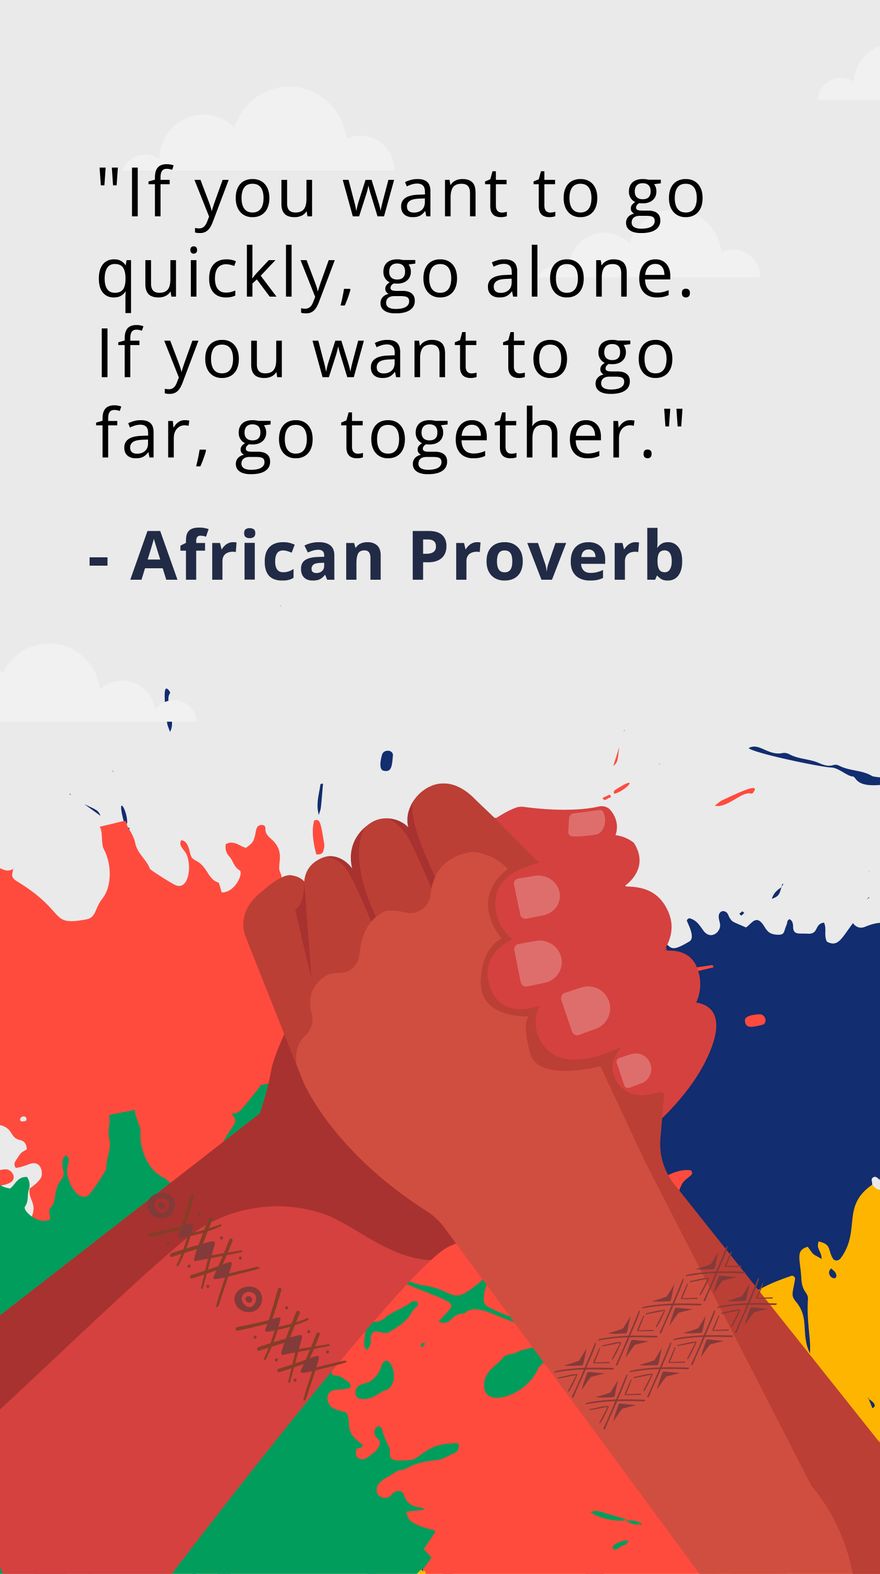 African Unity Day Quote in JPG